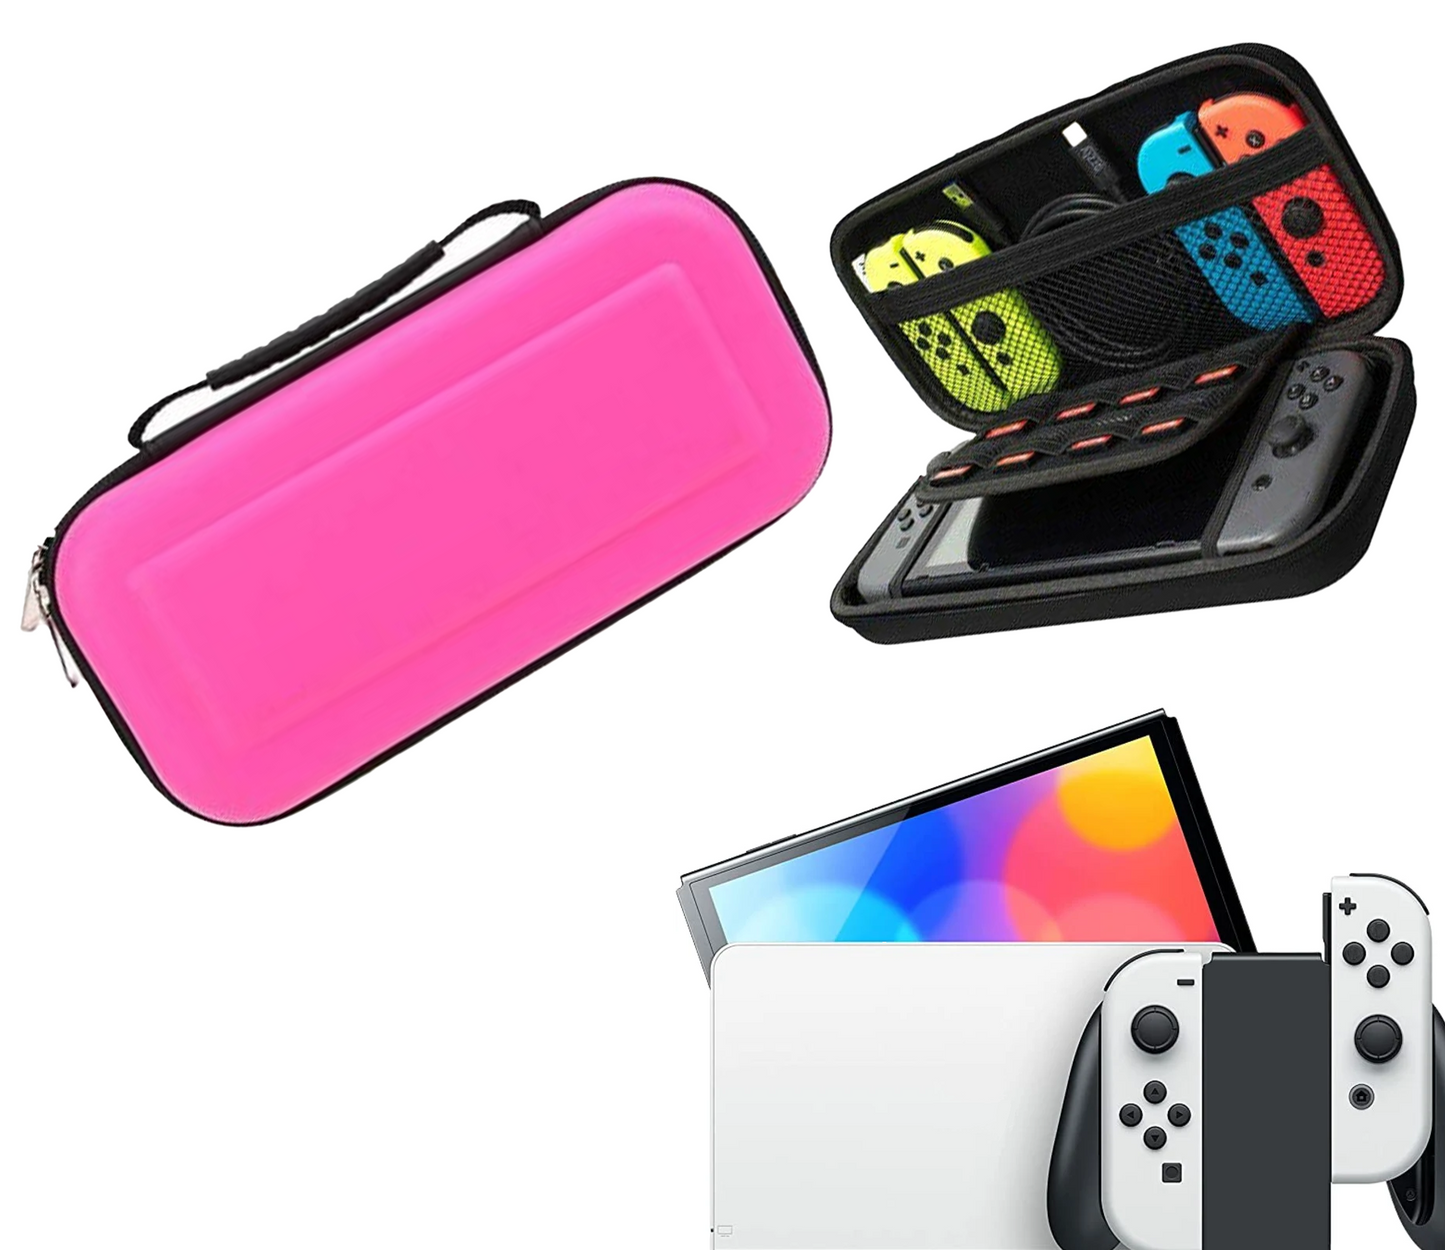 Protective cover | Hardcase Storage Cover | Case | Pink | Accessories suitable for Nintendo Switch